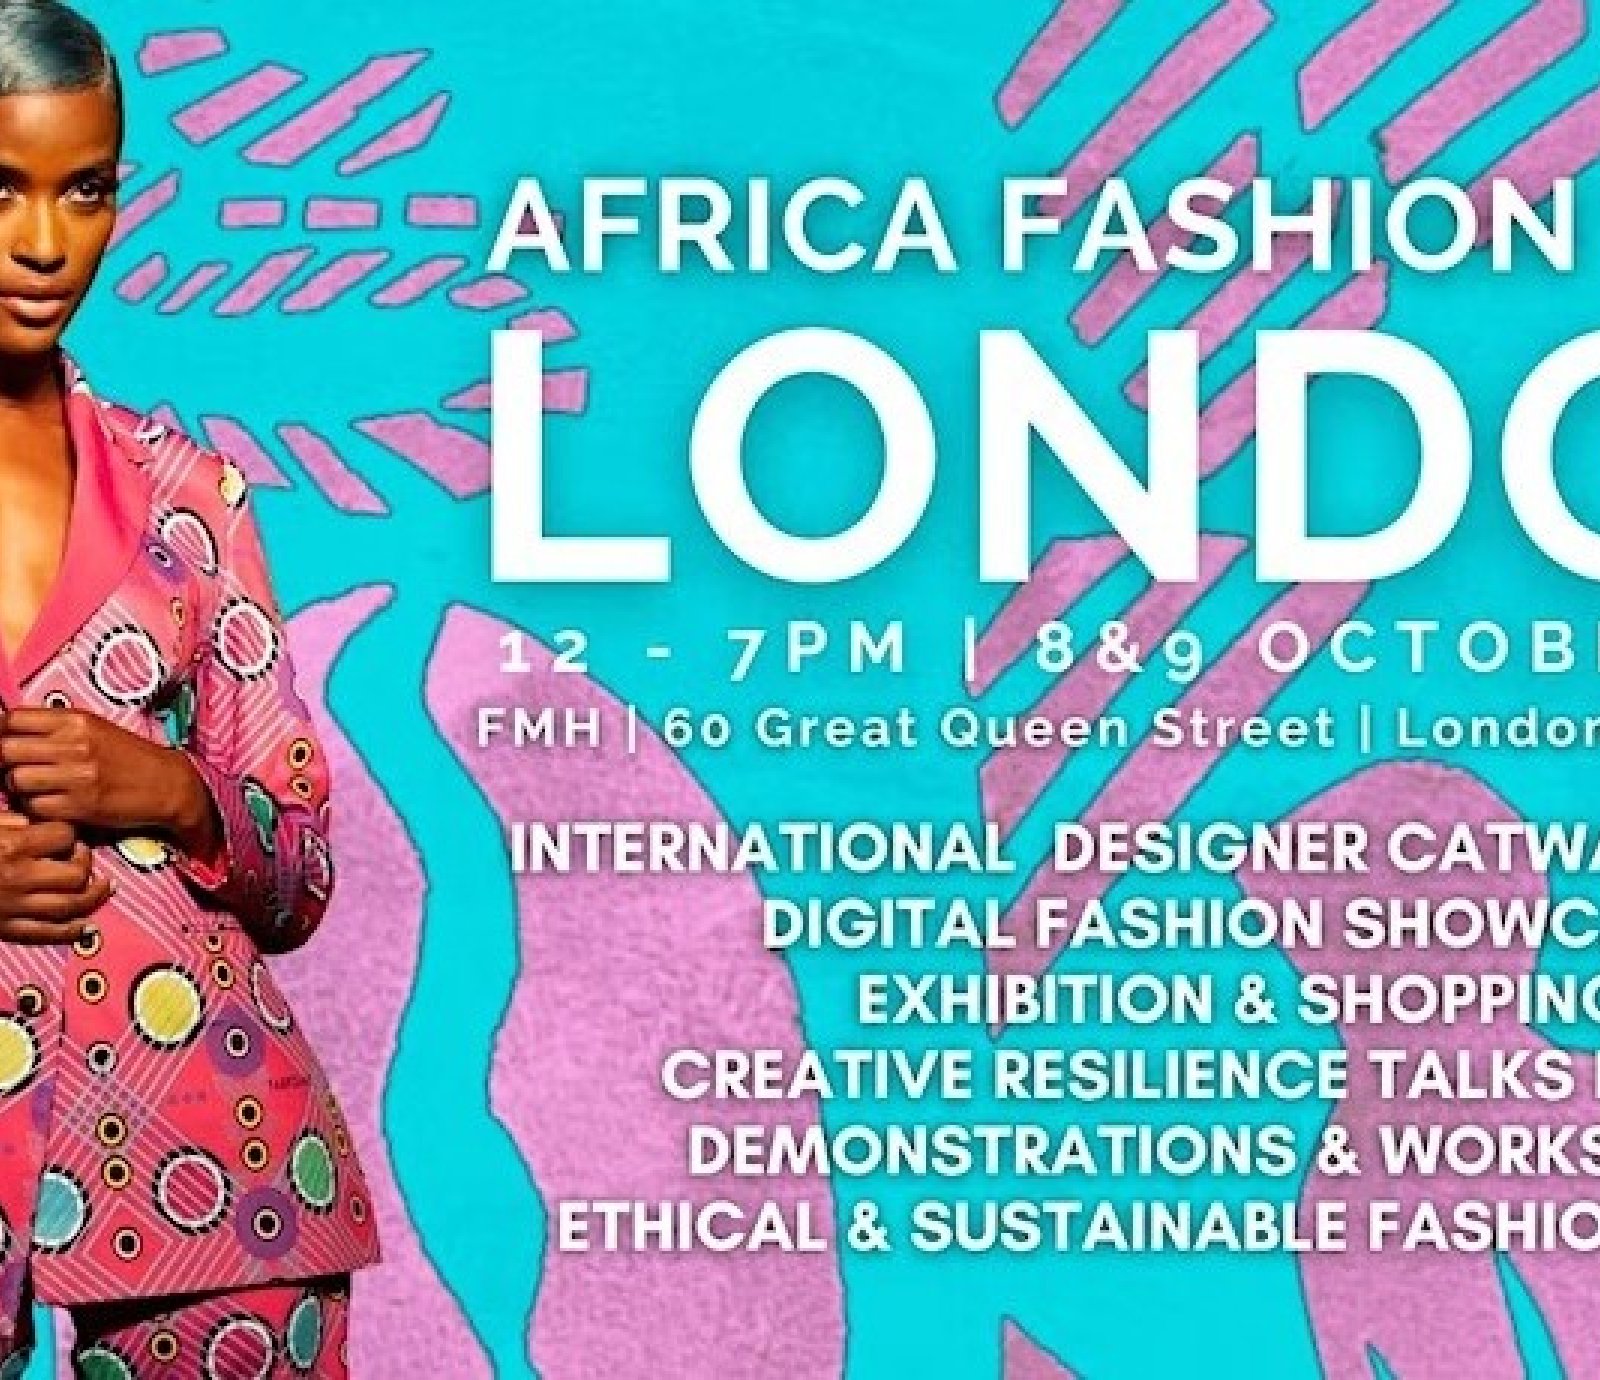 Africa Fashion Week London 2022 - THE BEST IN AFRICAN FASHION